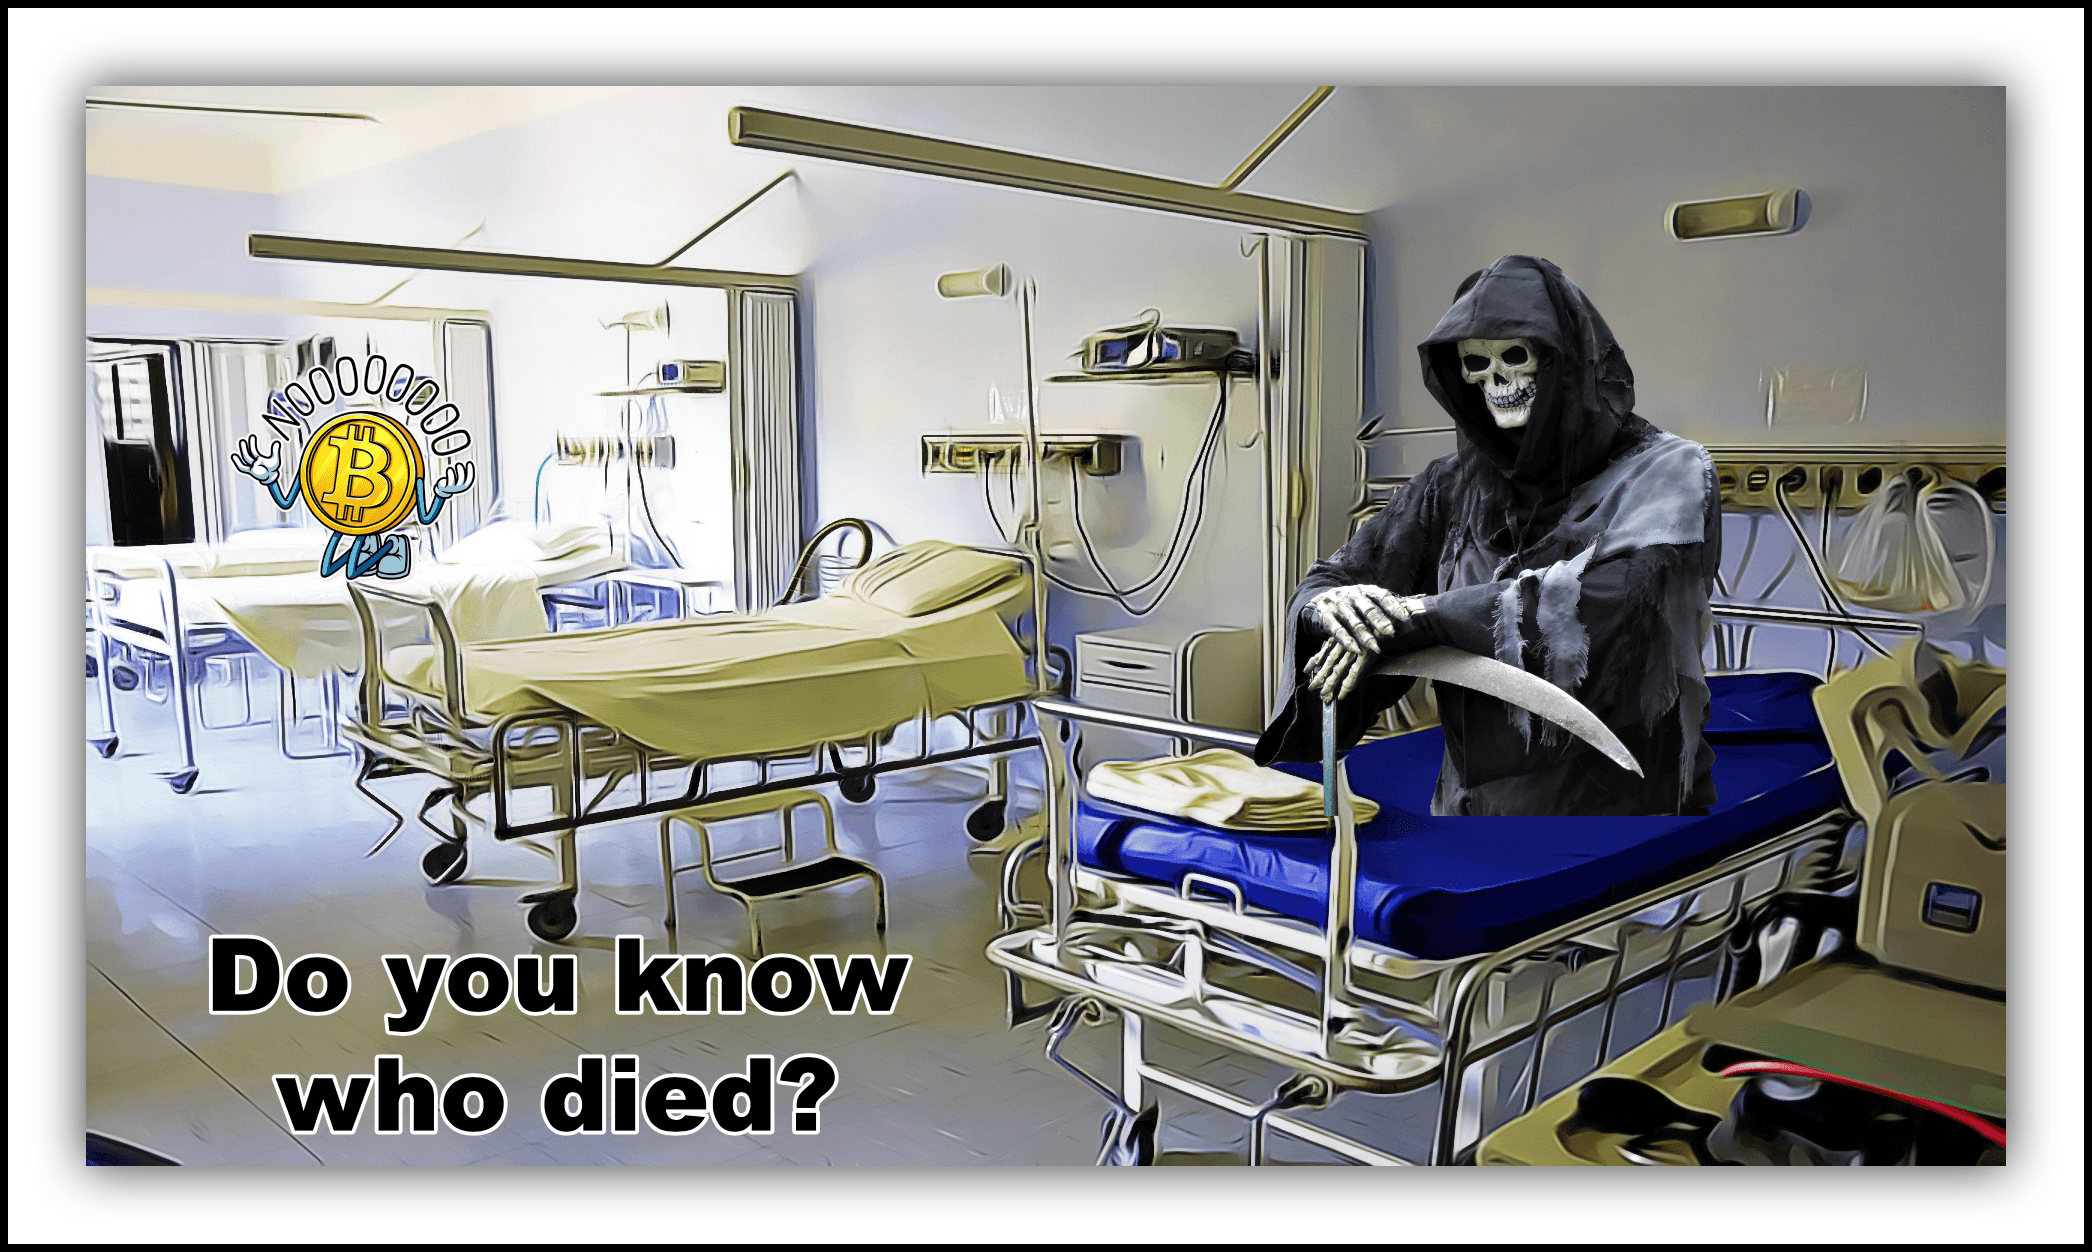 Do you know who died?